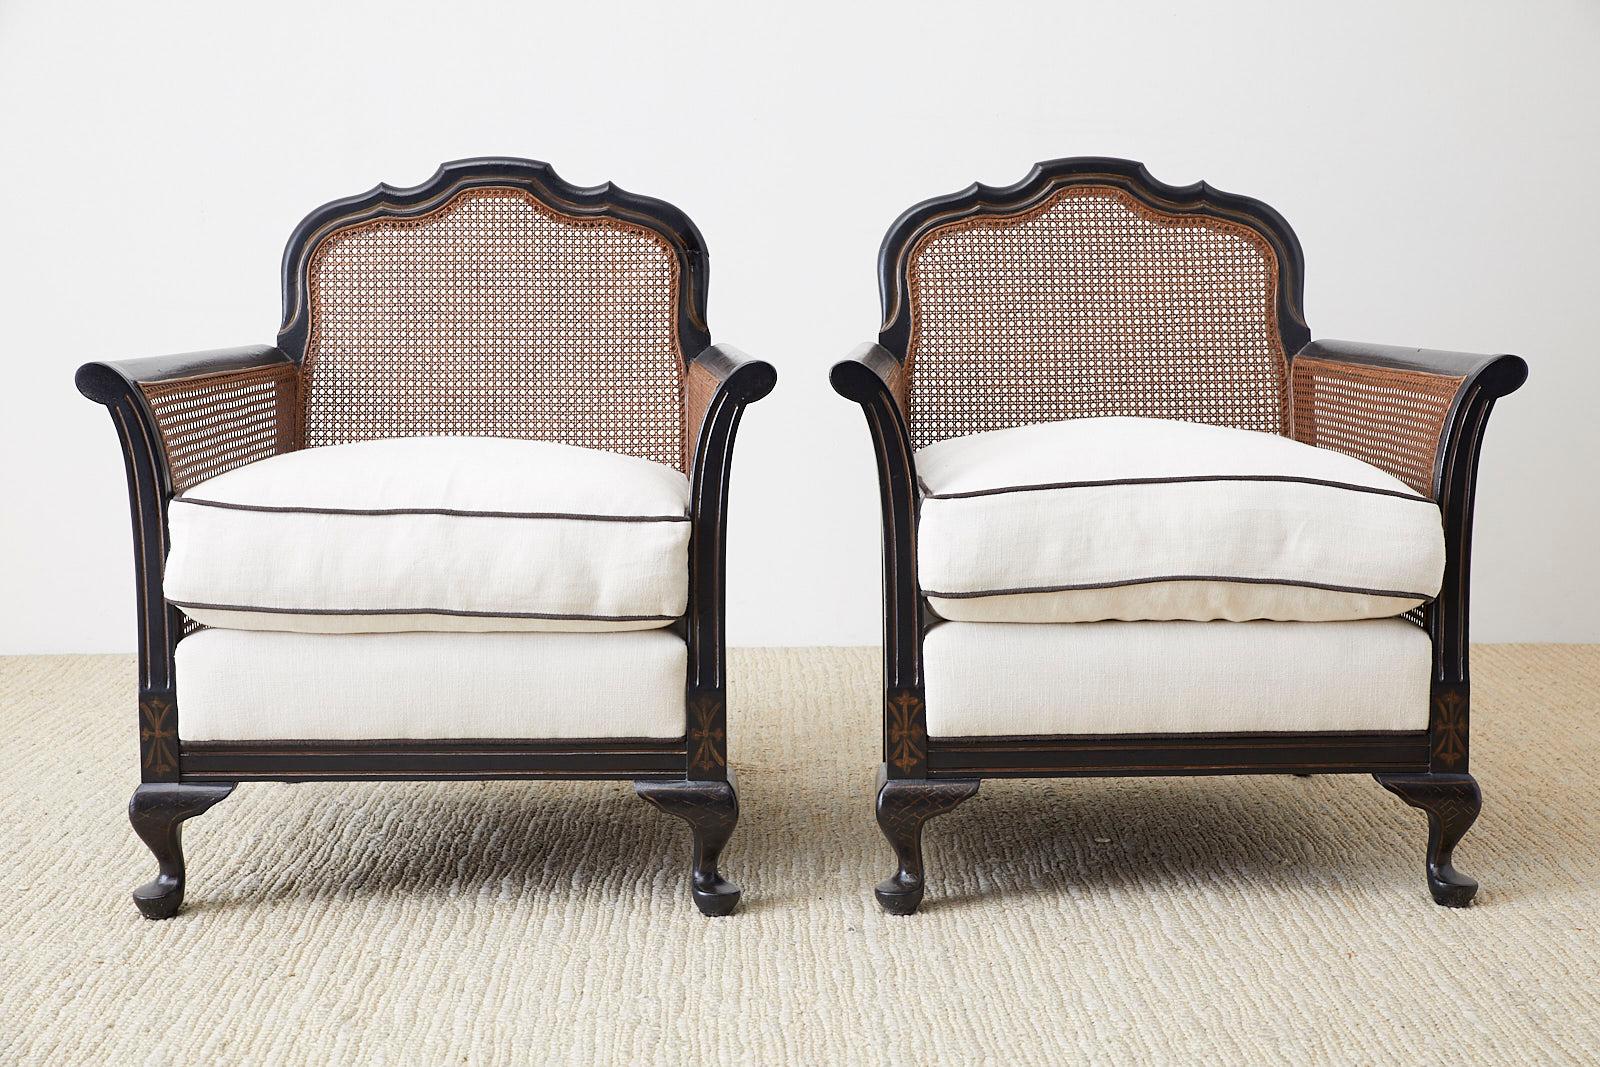 Regency Pair of Ebonized Cane Bergere Lounge Chairs with Linen